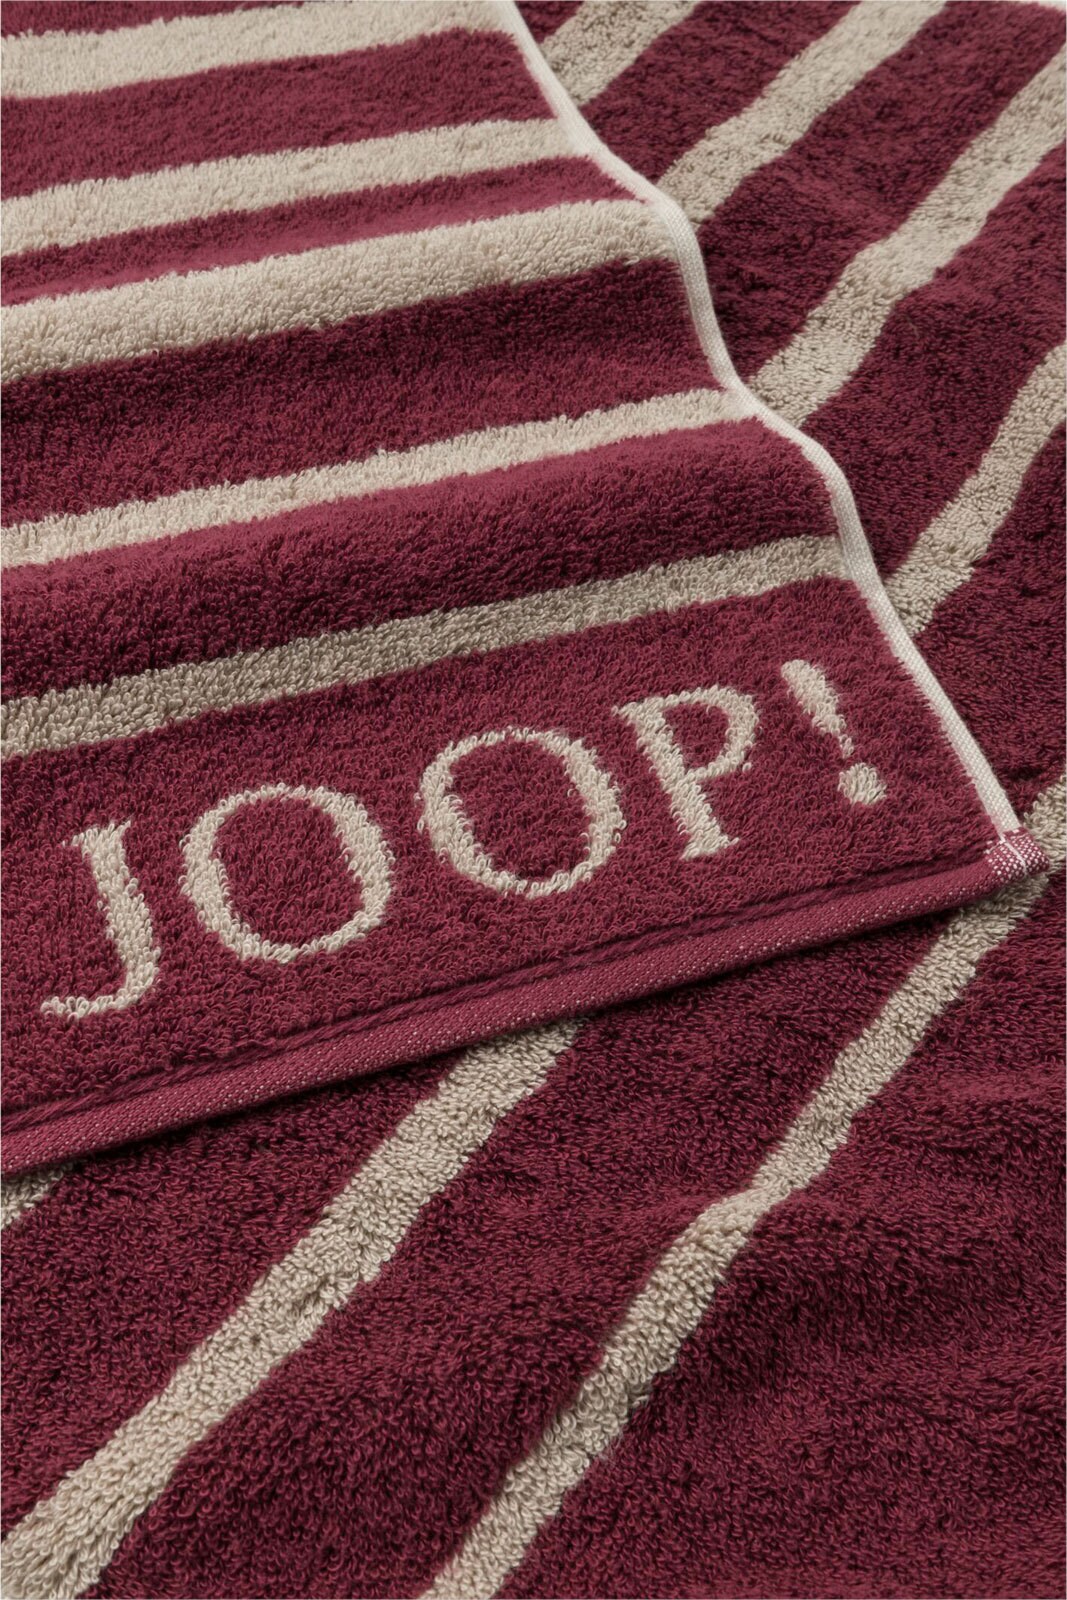 JOOP! Gästetuch SELECT SHADE 30 x 50 cm rouge